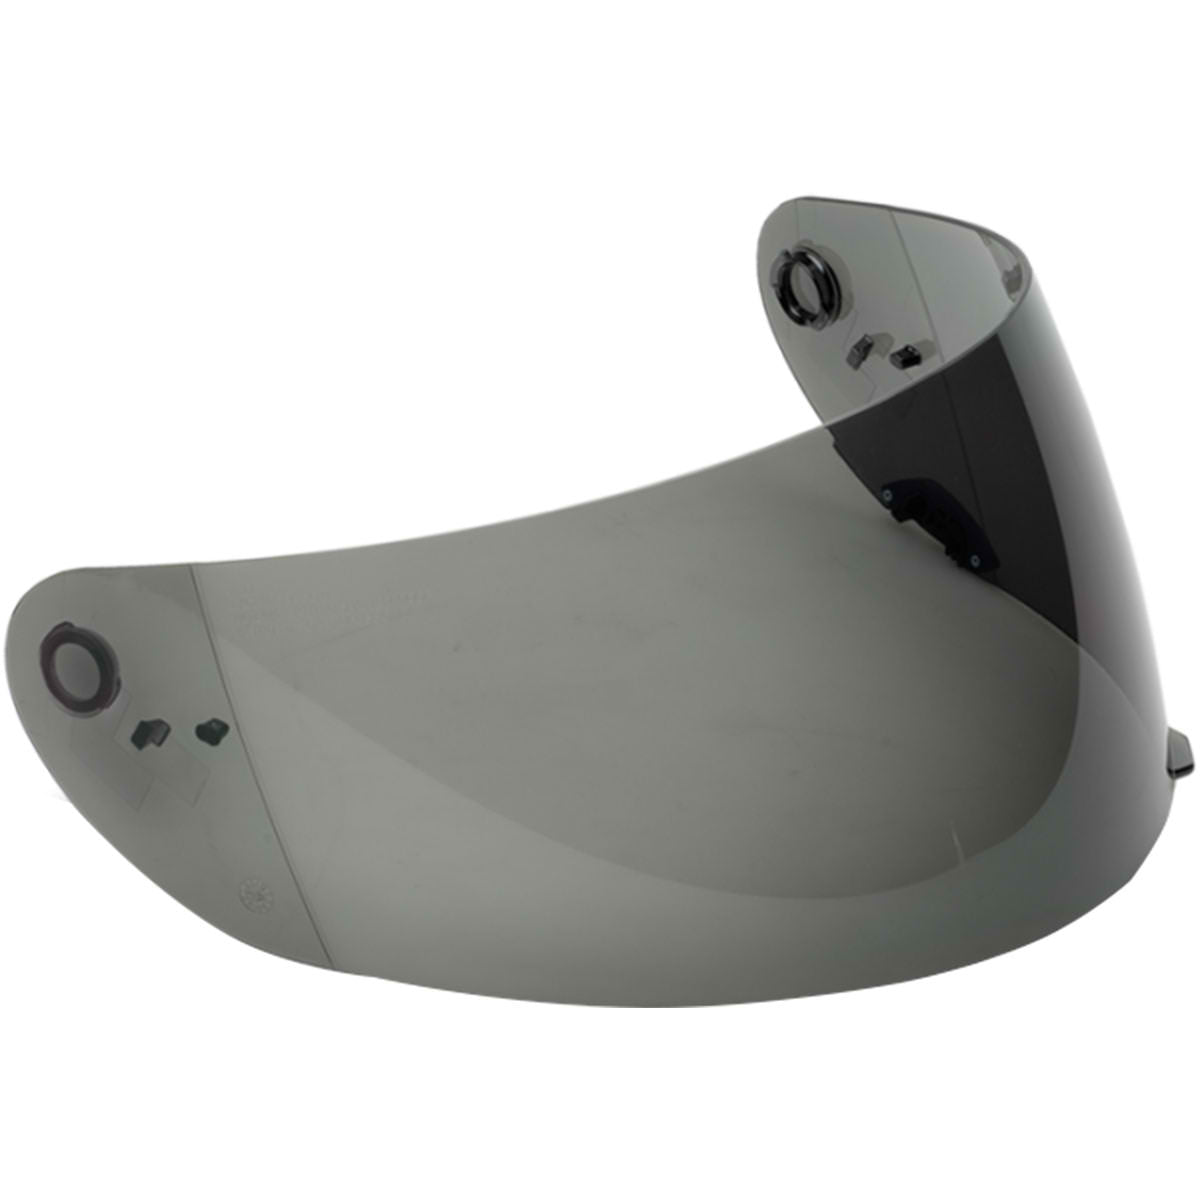 Bell Click Release Face Shield Helmet Accessories-2010057